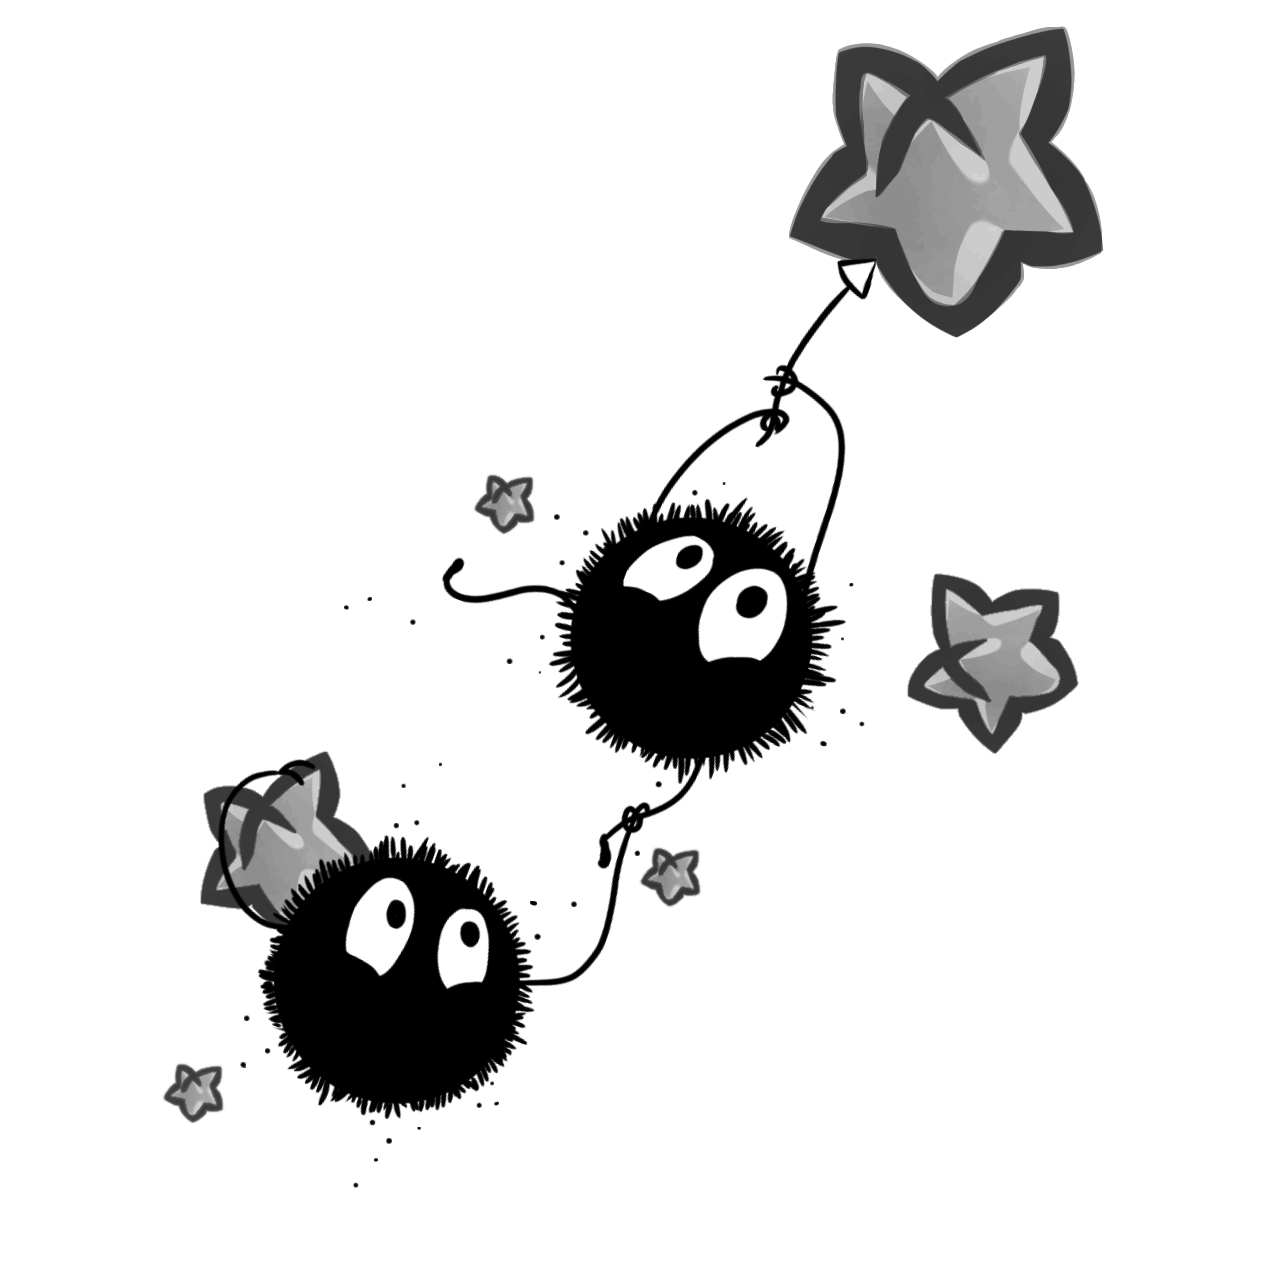 Soot sprite tattoo - dumbpupvt's Ko-fi Shop - Ko-fi ❤️ Where creators get  support from fans through donations, memberships, shop sales and more! The  original 'Buy Me a Coffee' Page.